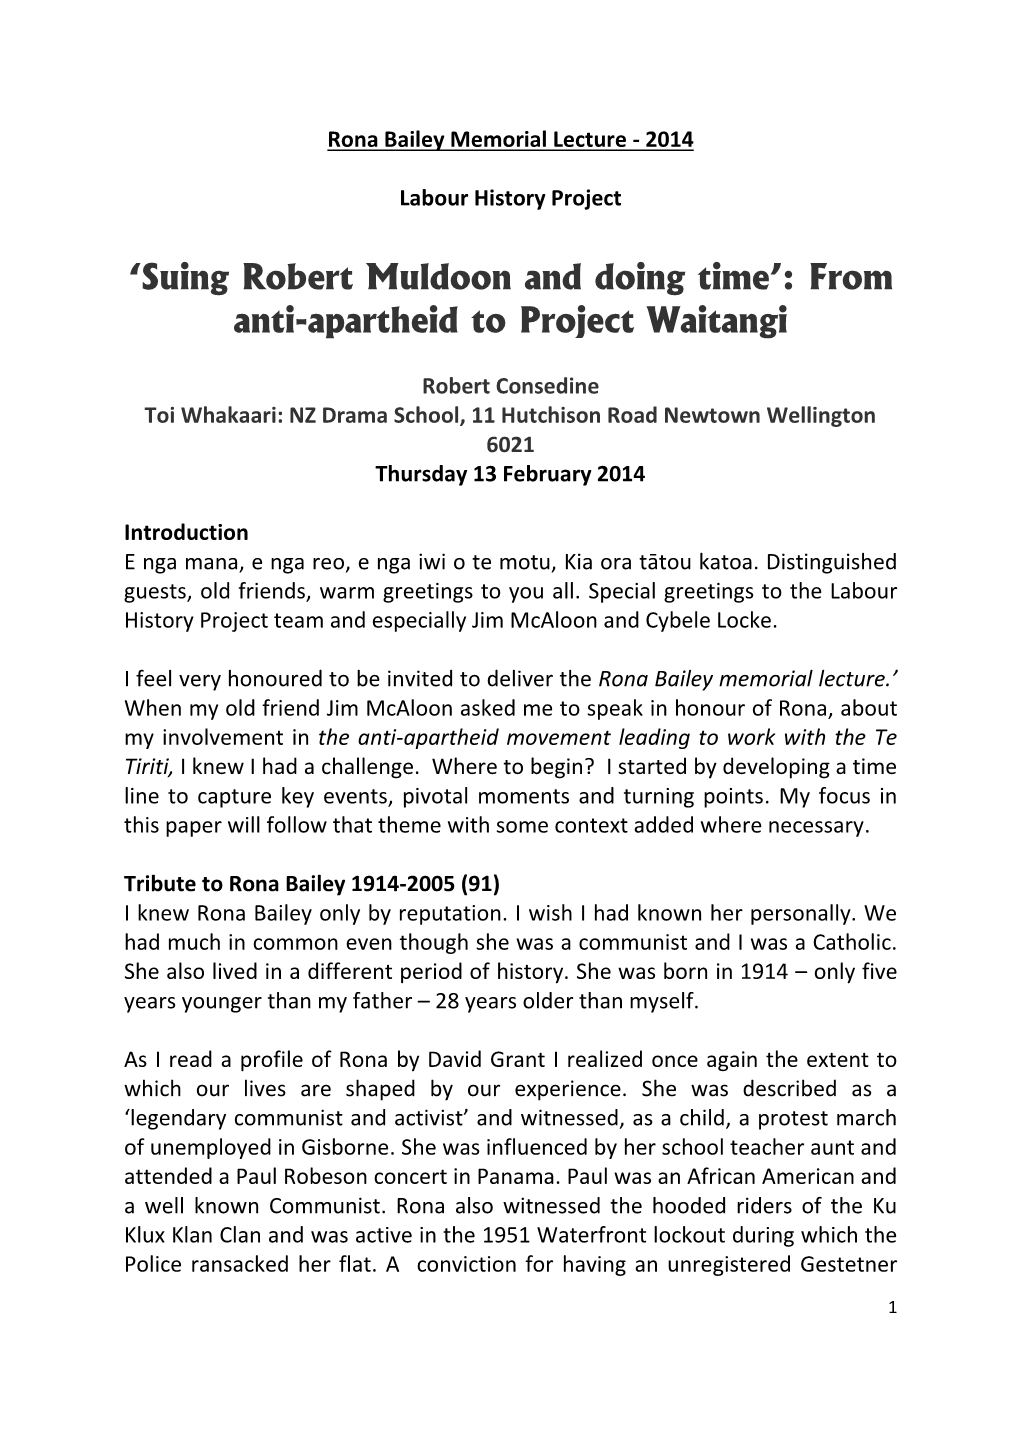 'Suing Robert Muldoon and Doing Time': from Anti-Apartheid to Project